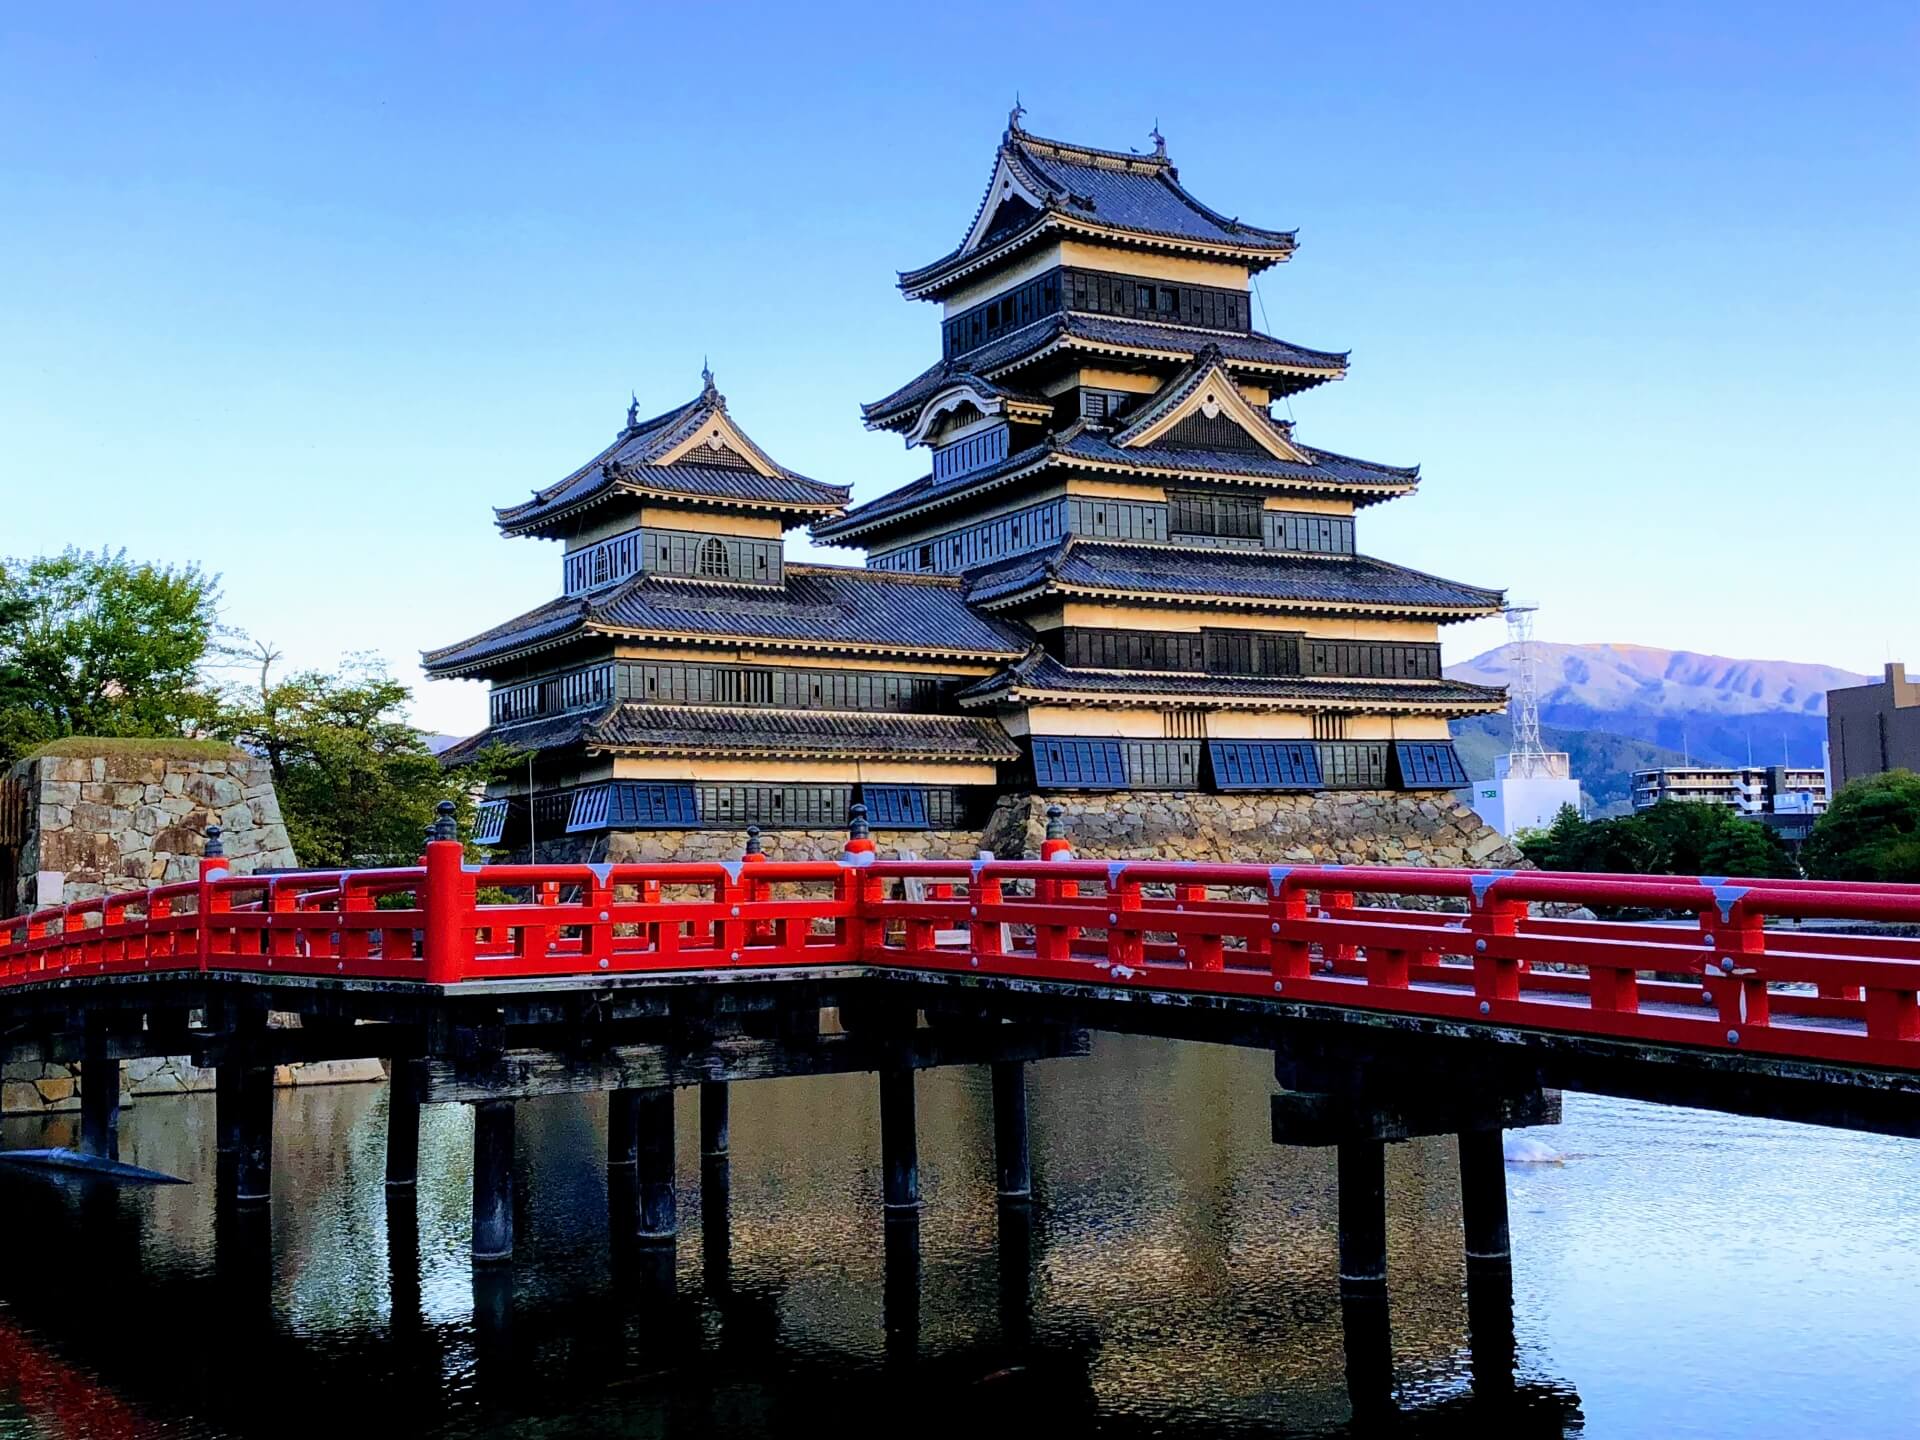 10 Things To Do In Japan